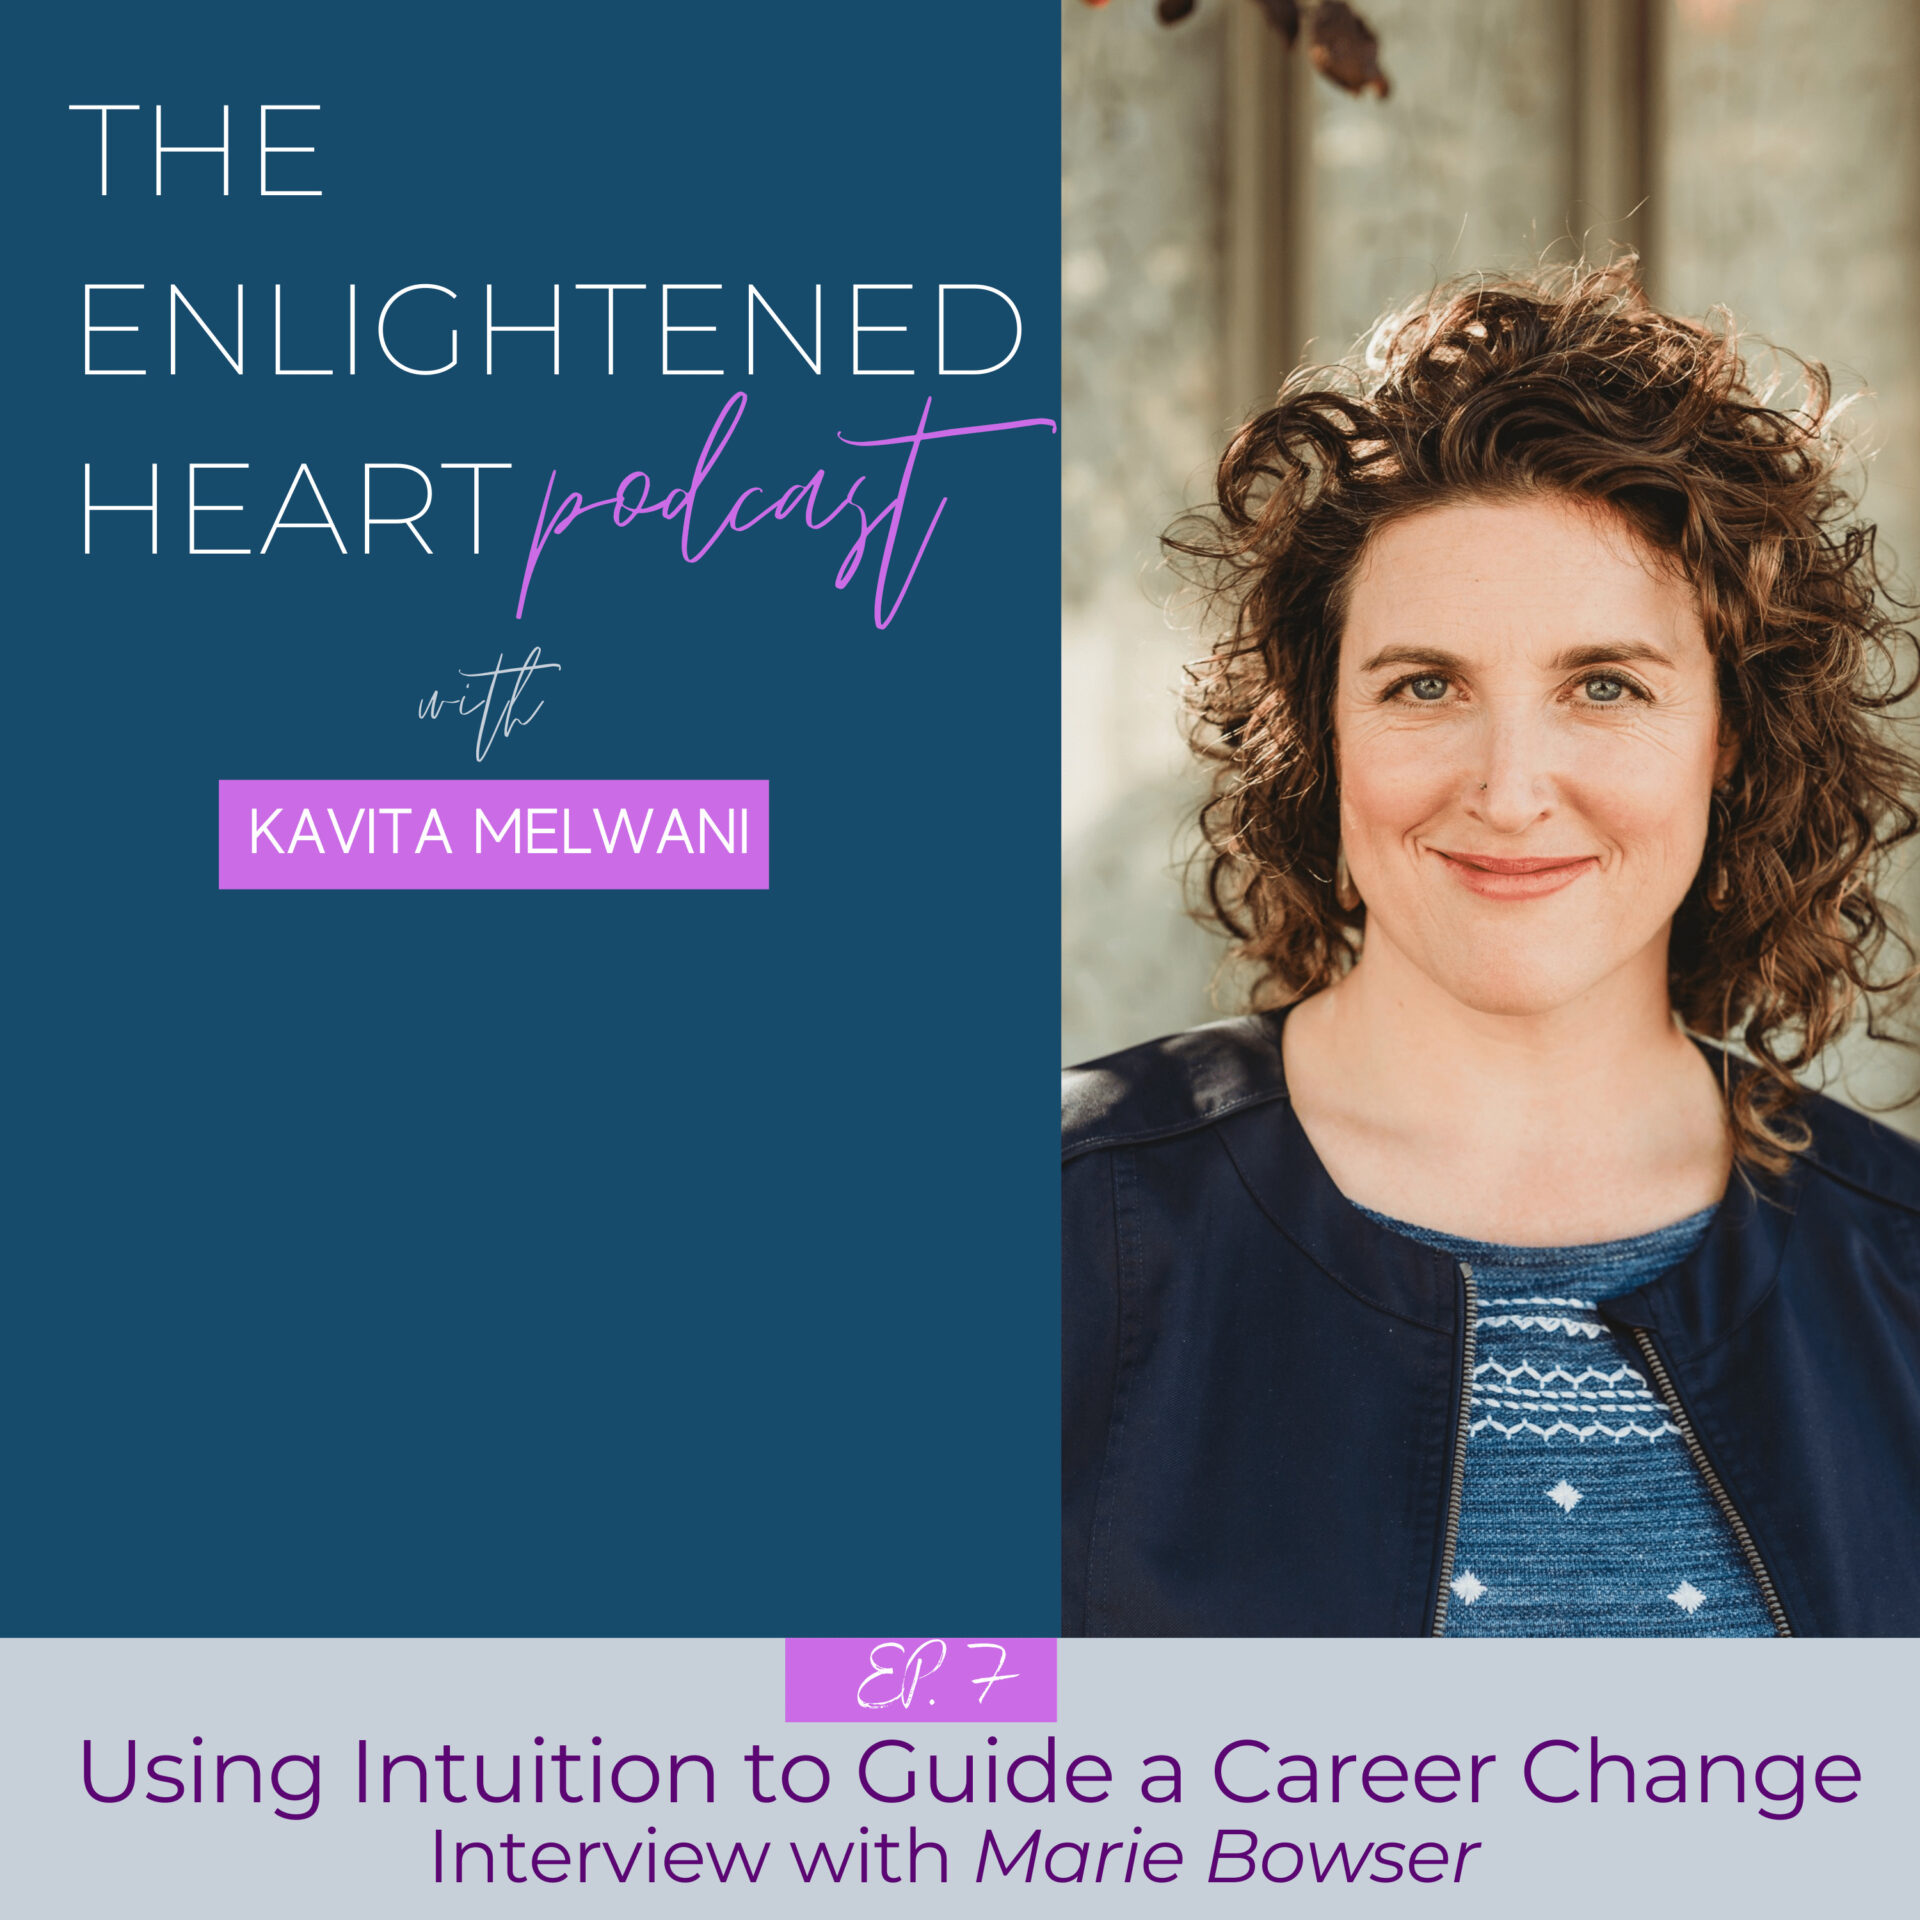 Using Intuition to Guide a Career Change: Interview with Marie Bowser